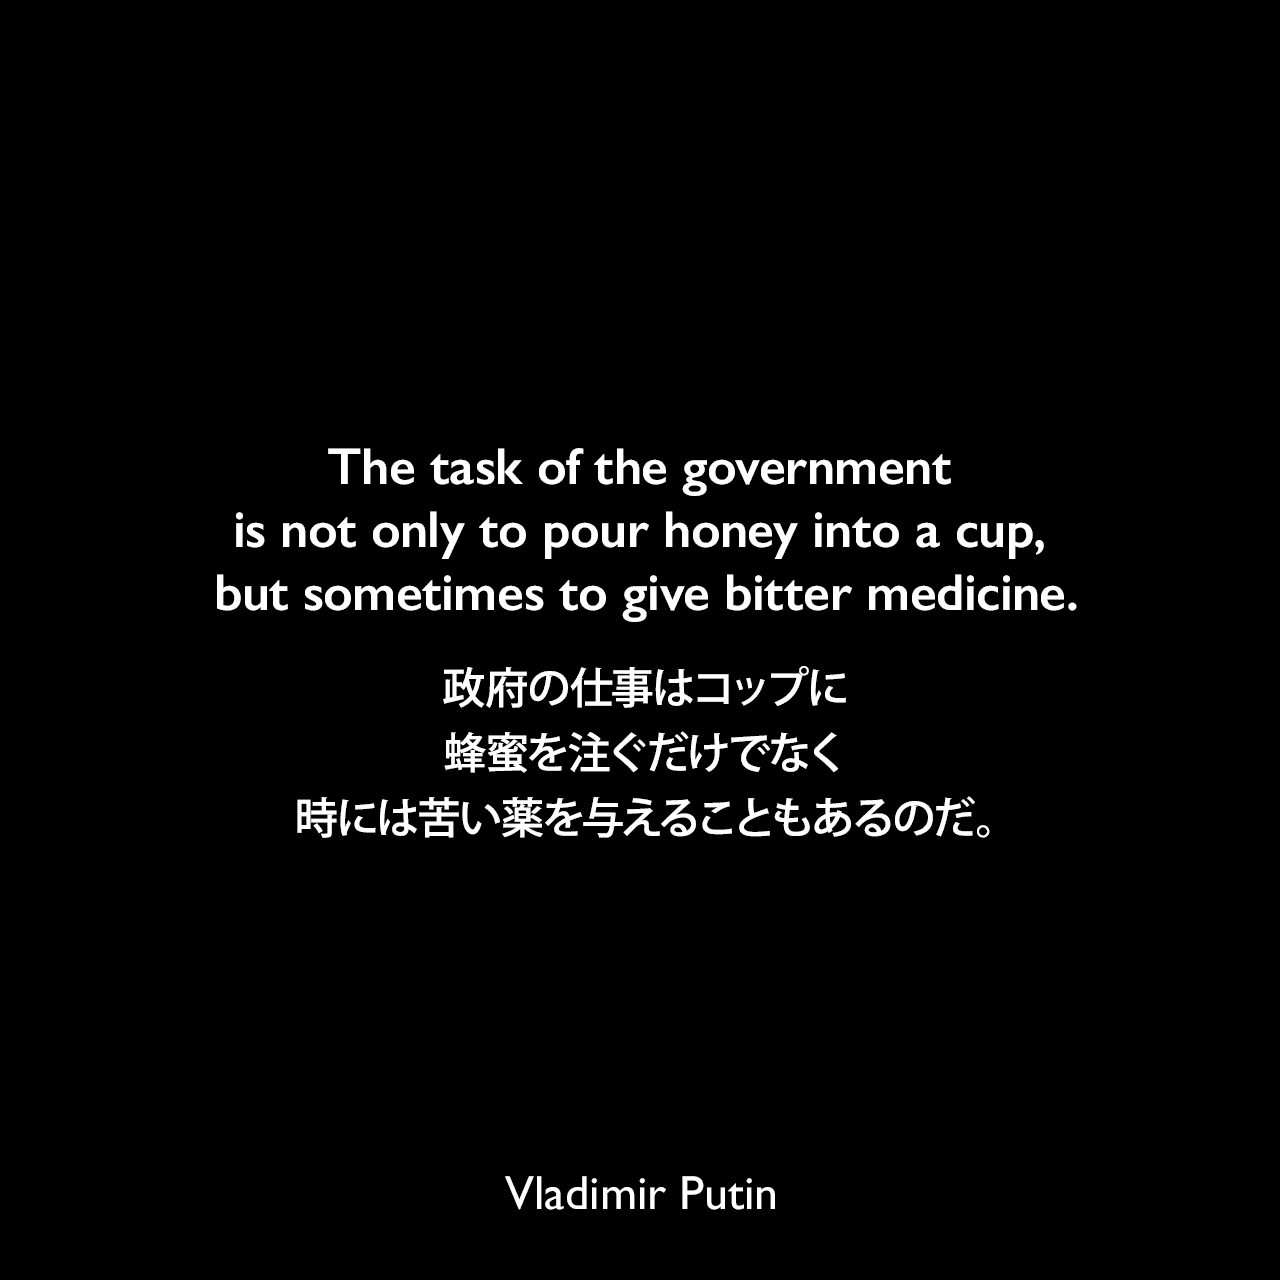 The task of the government is not only to pour honey into a cup, but sometimes to give bitter medicine.政府の仕事はコップに蜂蜜を注ぐだけでなく、時には苦い薬を与えることもあるのだ。Vladimir Putin